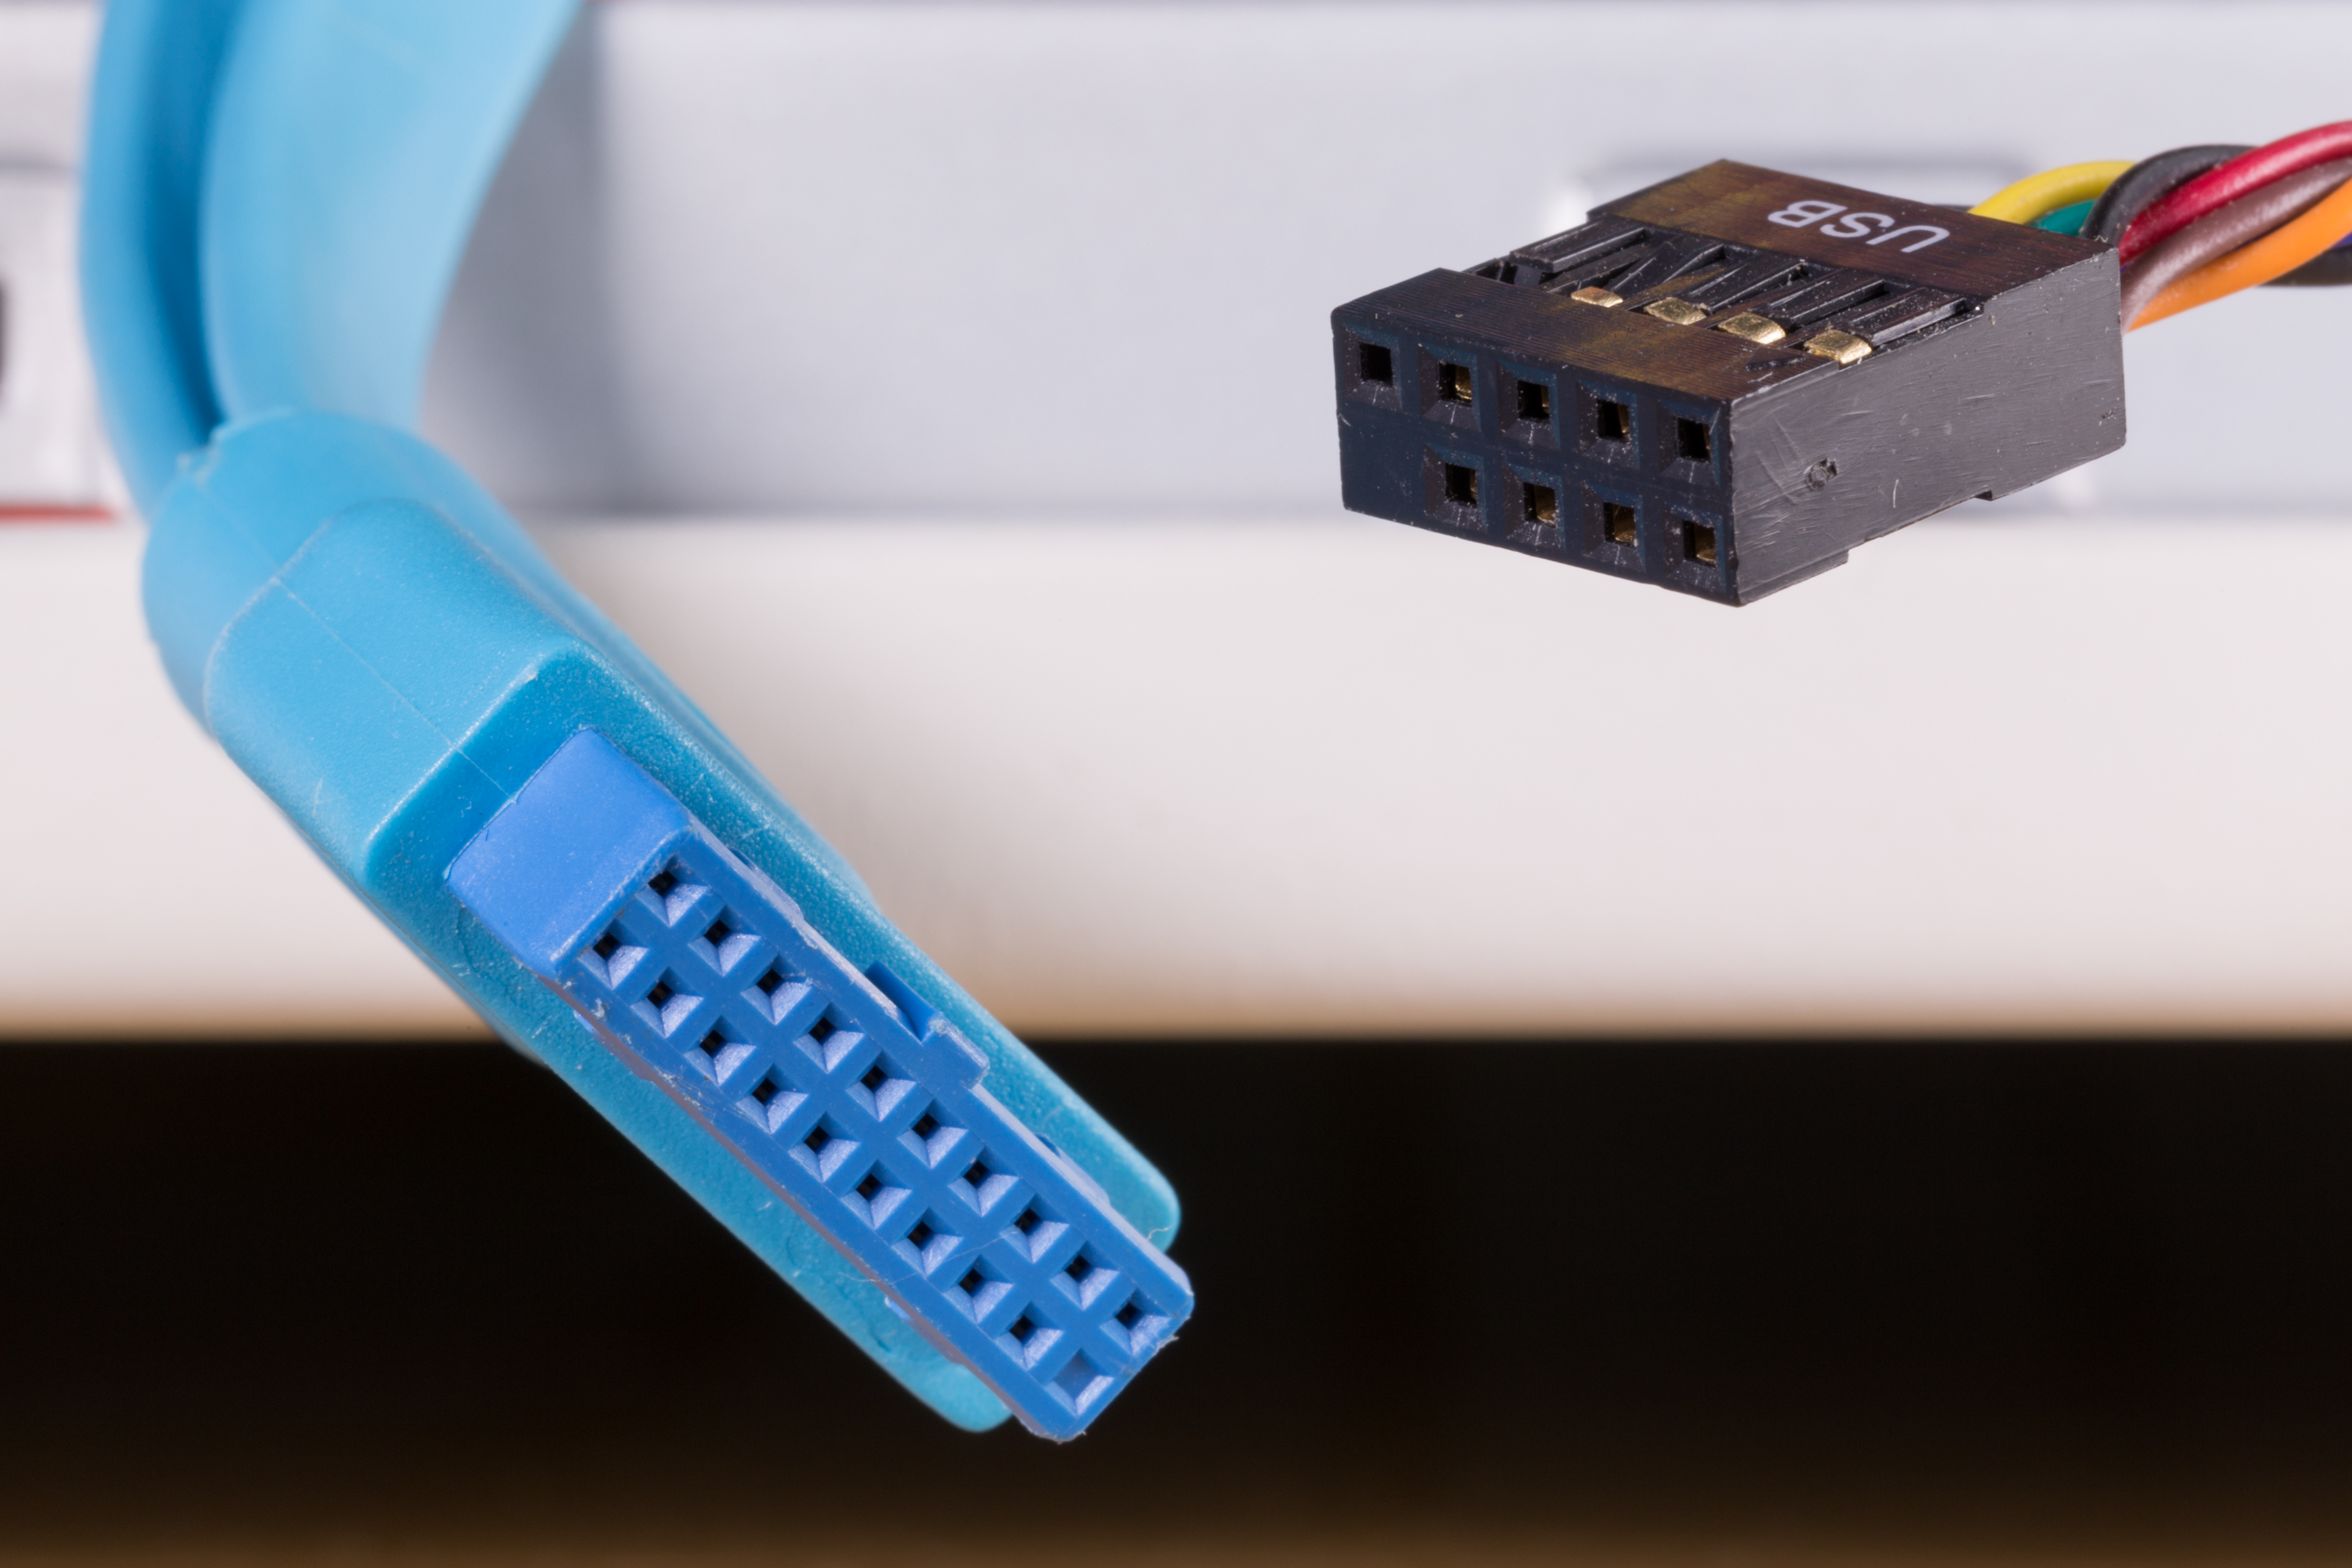 Header connectors for USB3 and its forerunner